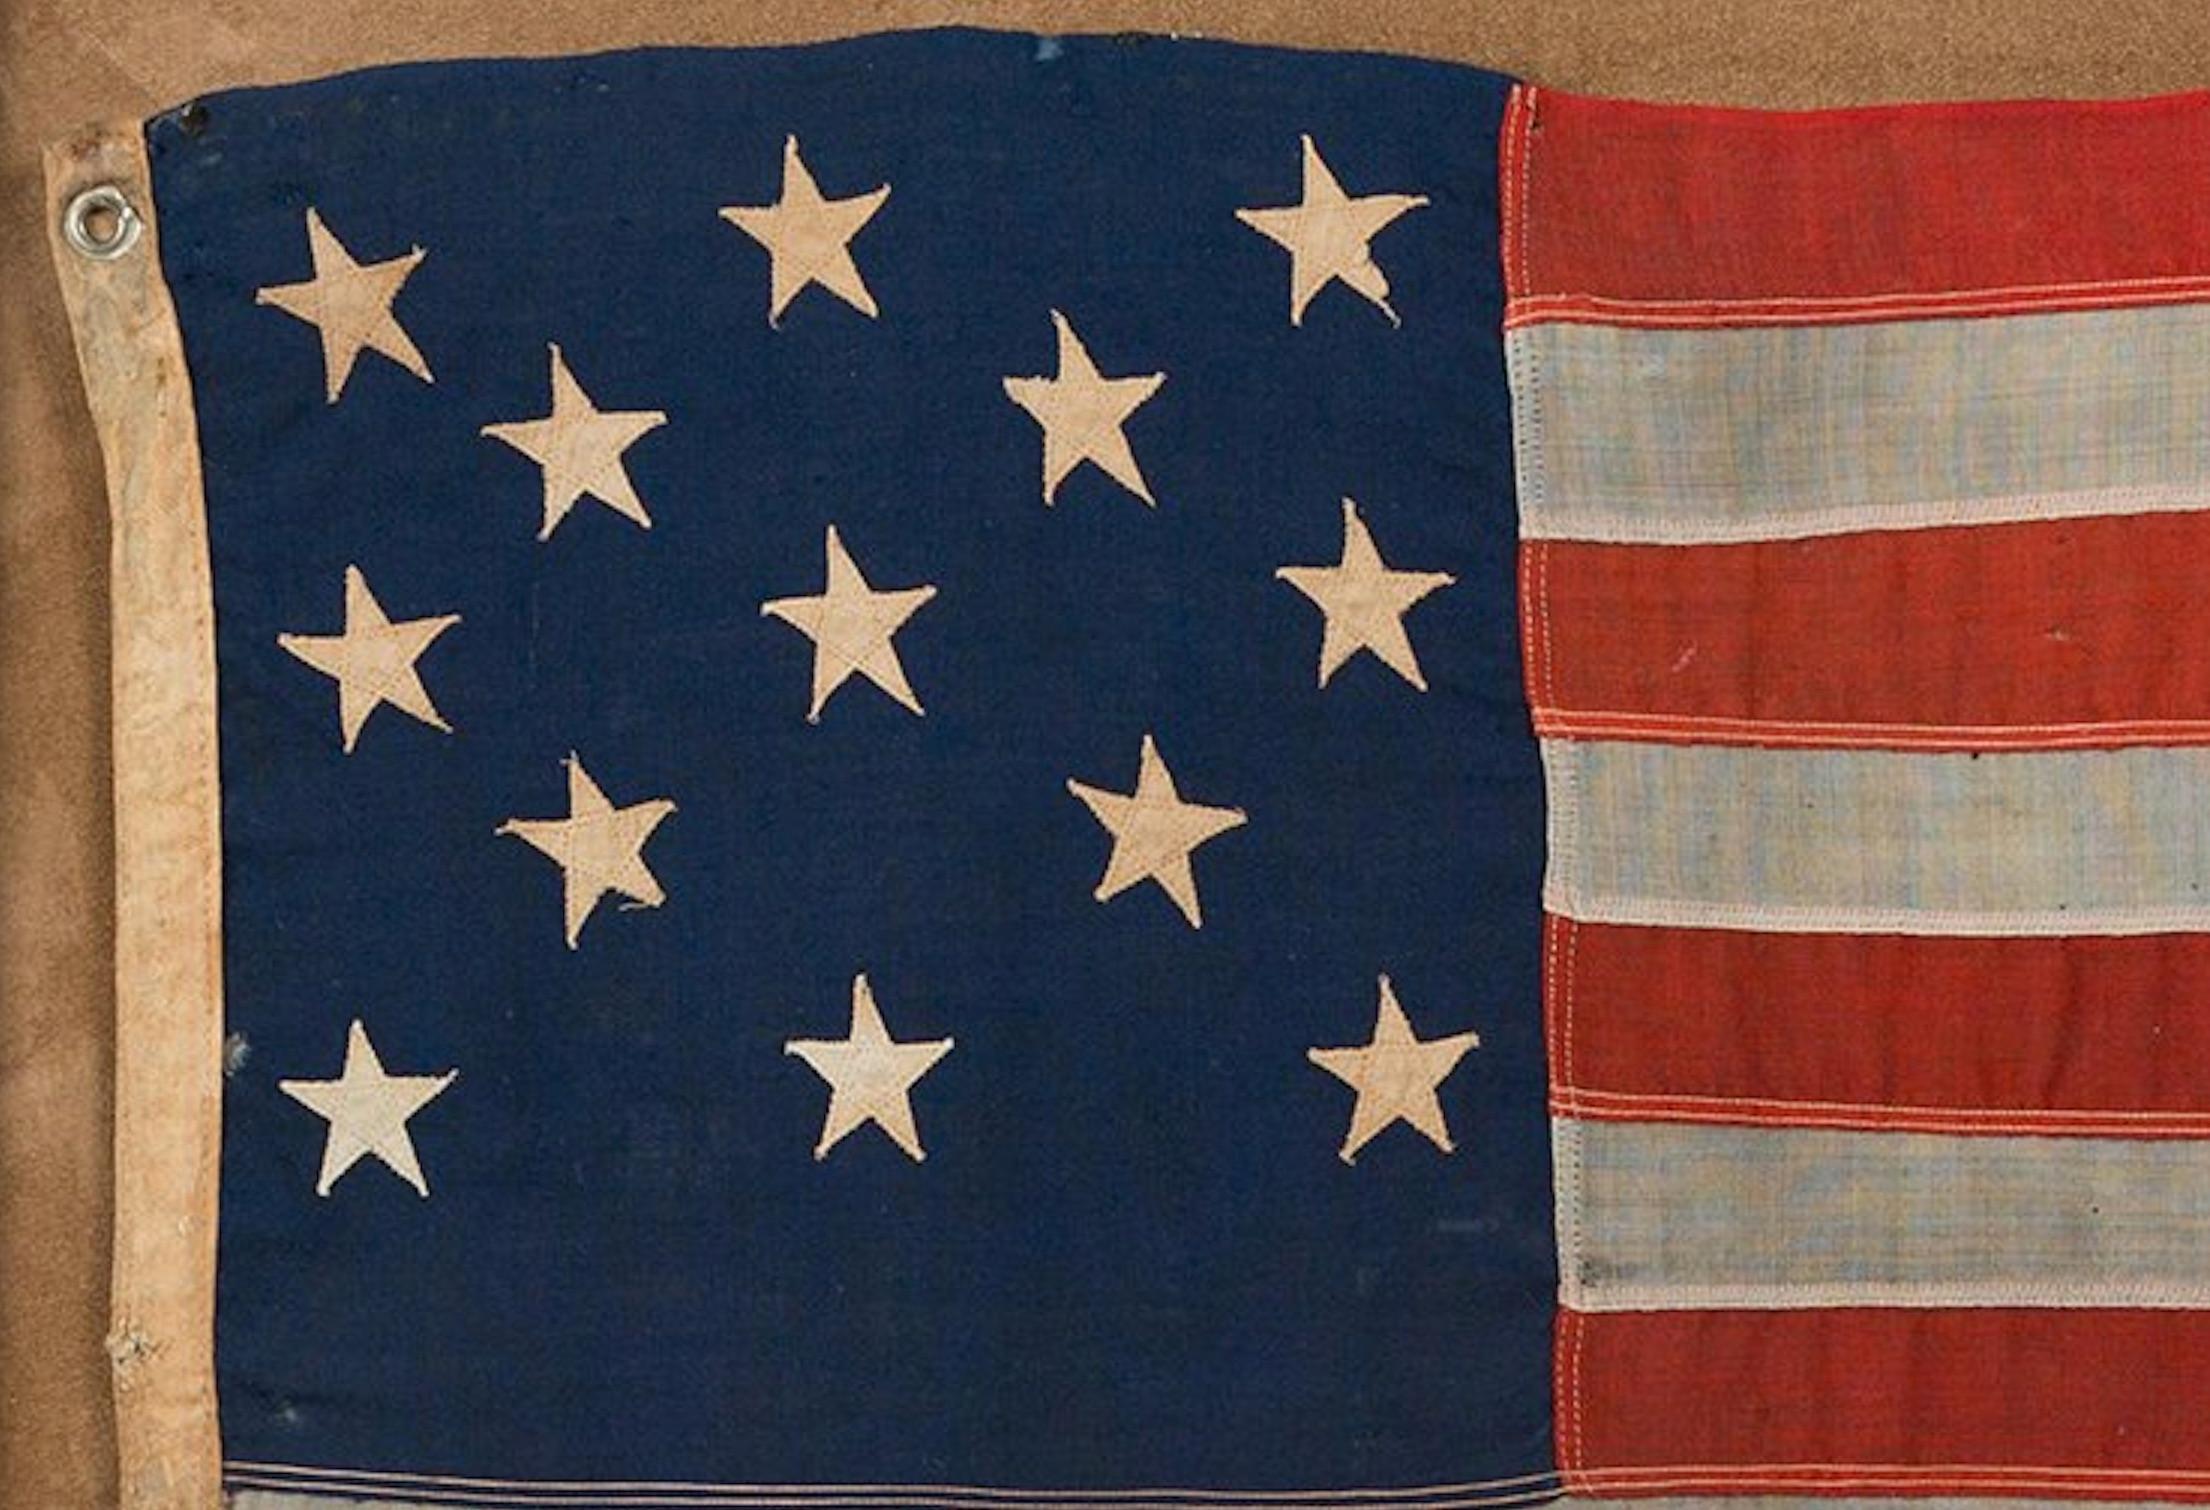 Presented here is a 13-star American flag, circa 1890-1910. The stars are arranged in rows of 3-2-3-2-3, which is the most recurring pattern of 13-star flags in the late 19th and early 20th centuries.

The 3-2-3-2-3 pattern, which looks like a